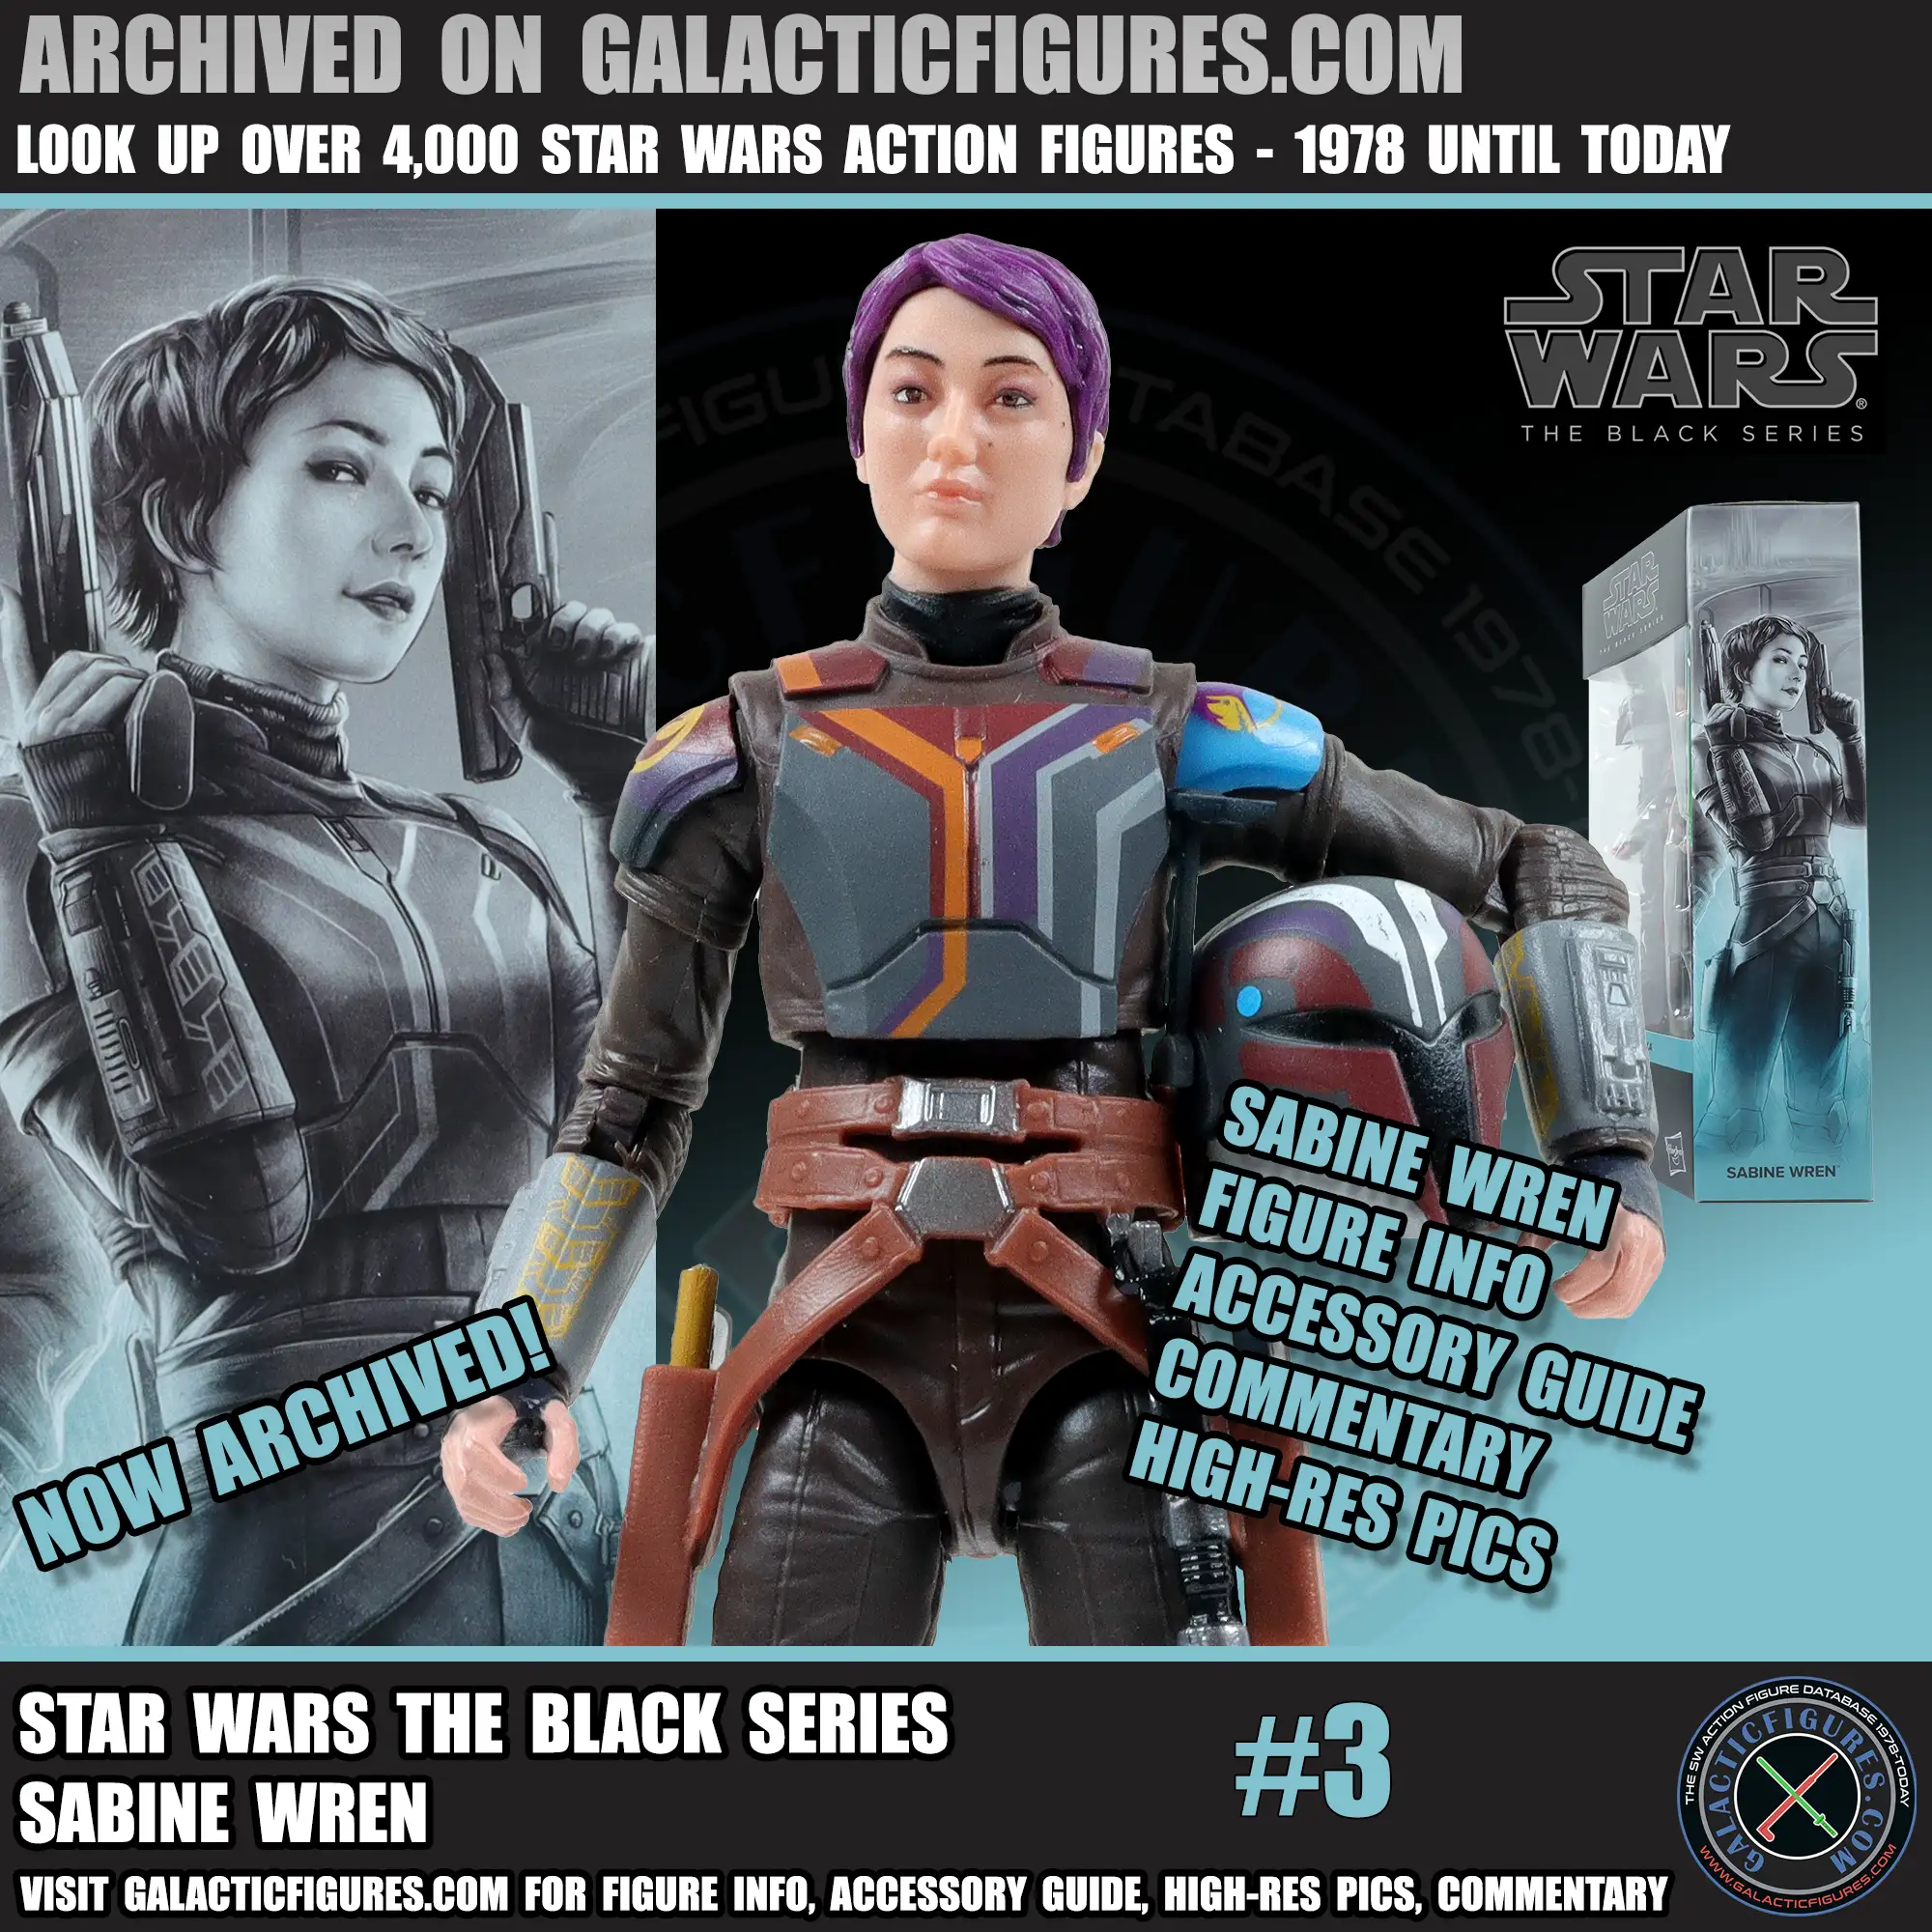 Black Series Sabine Wren Archived - Take A Look!